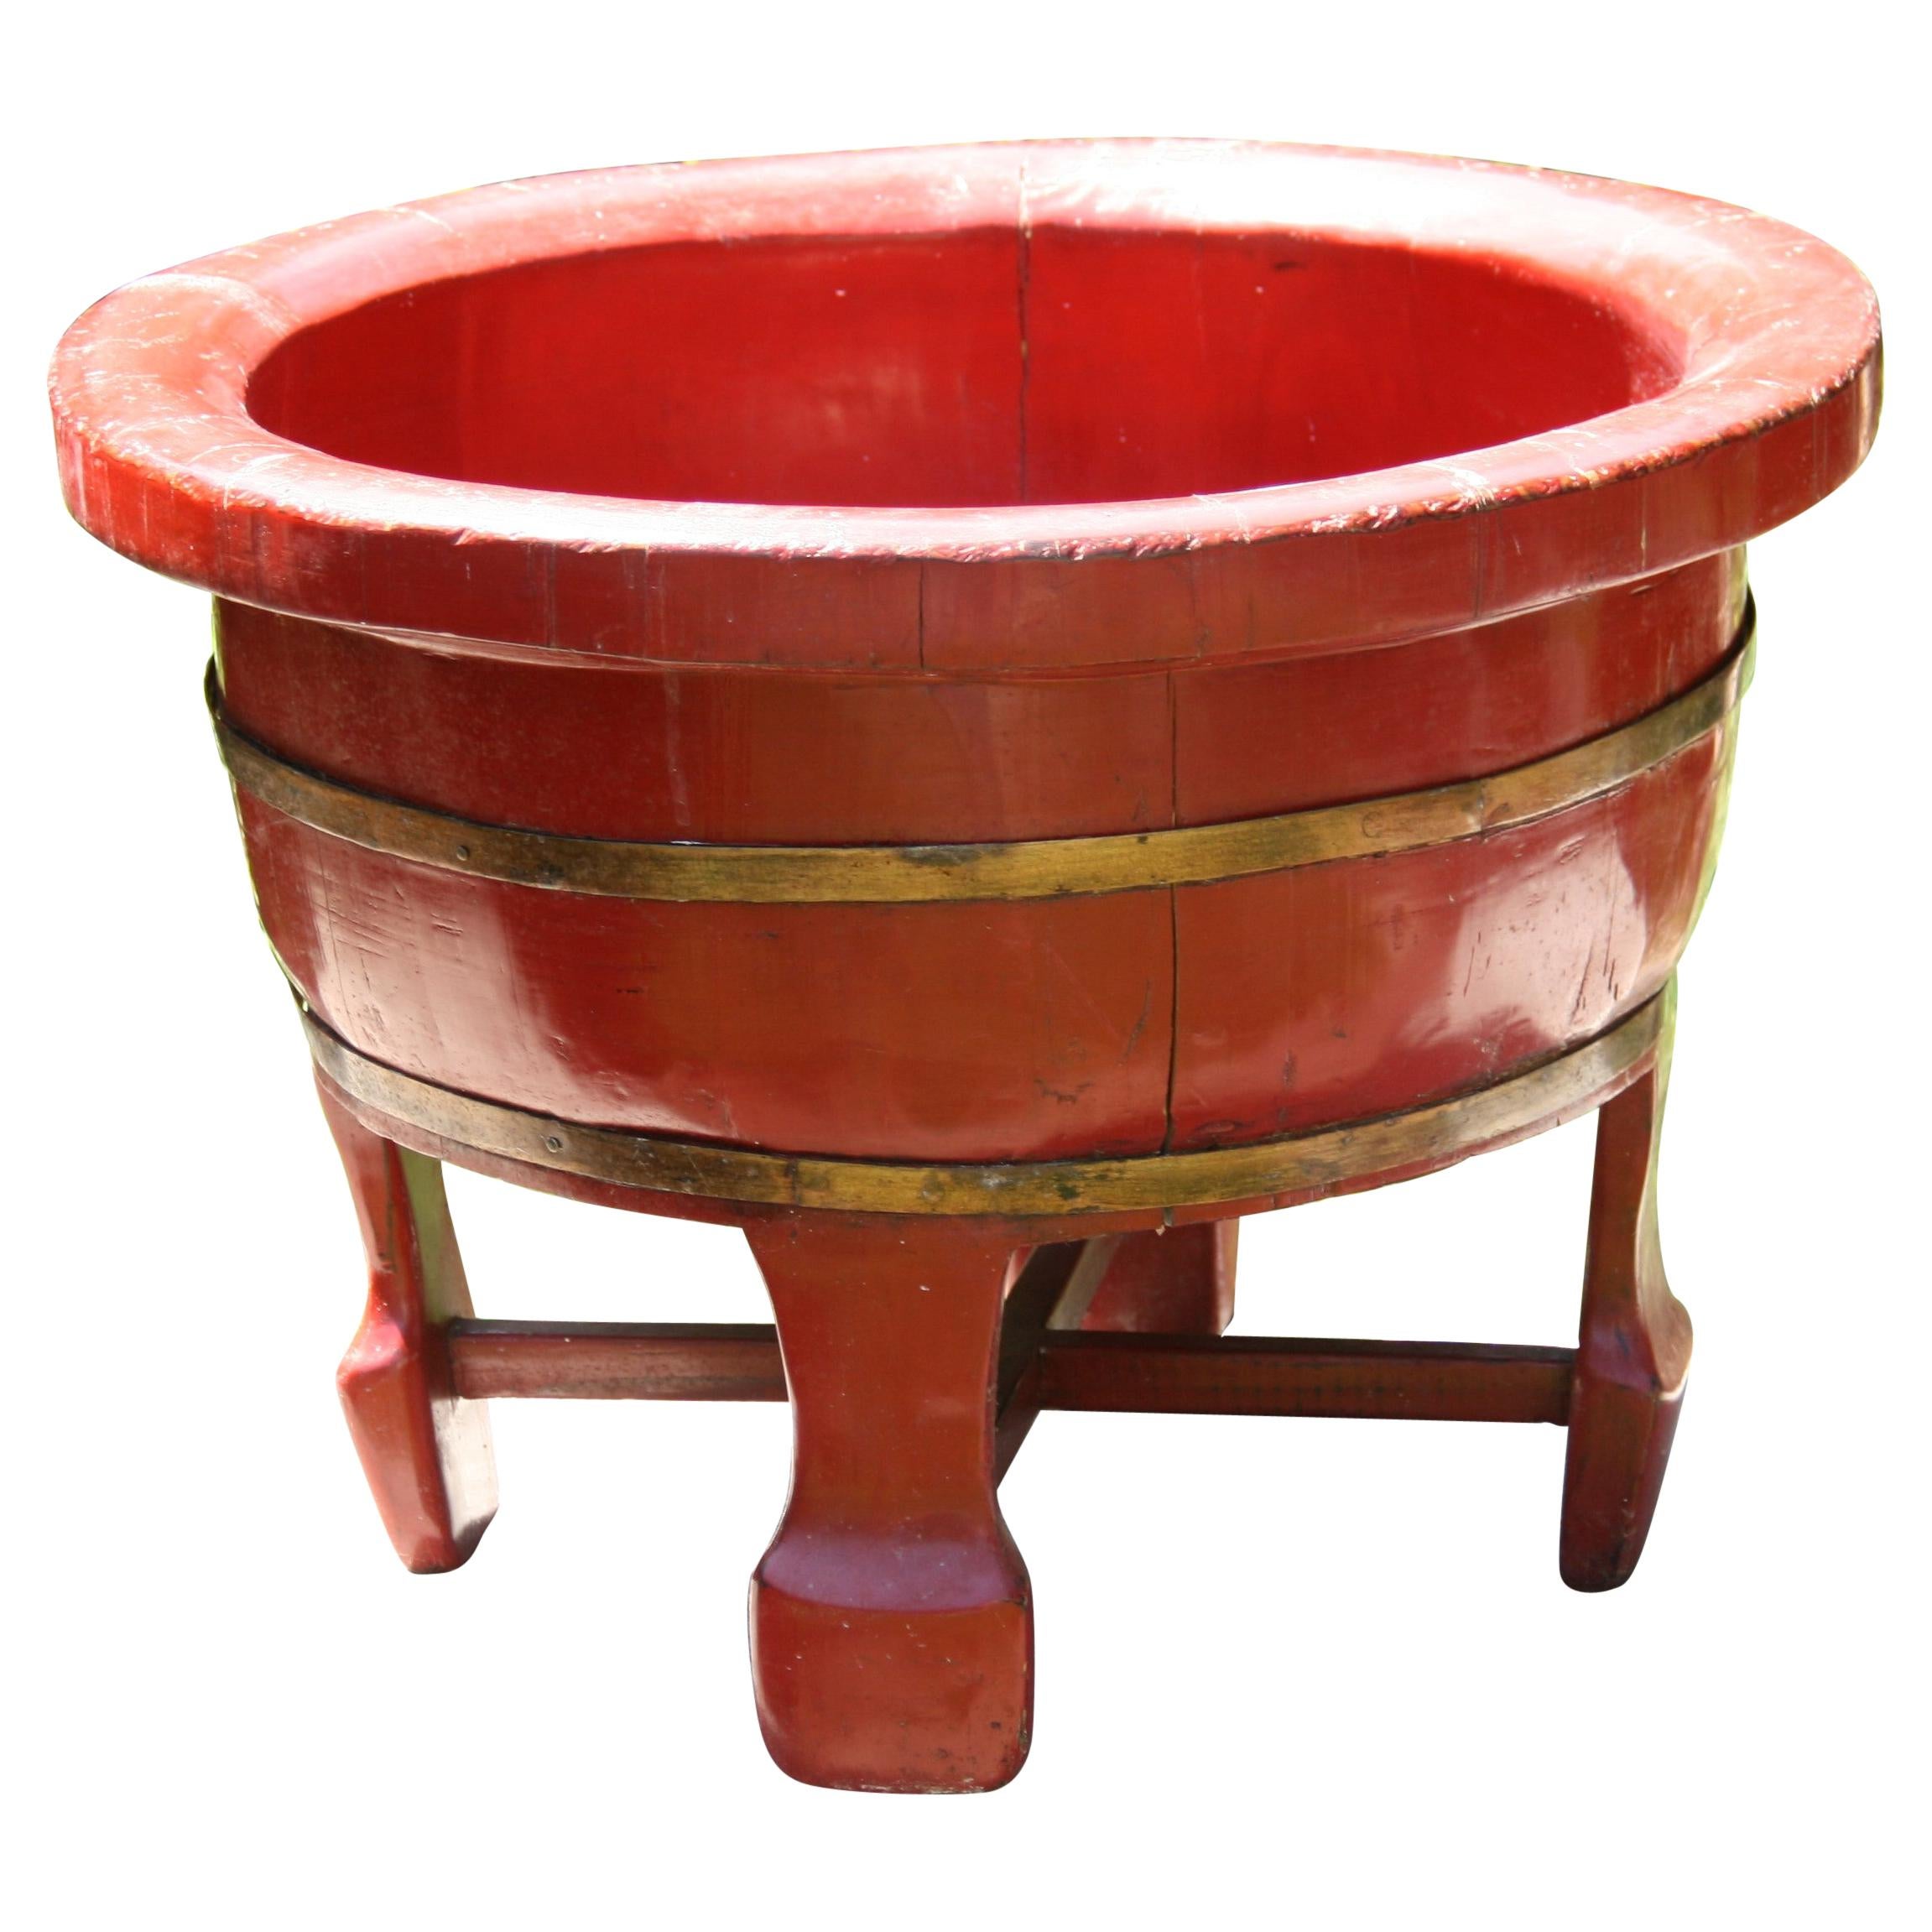 Japanese Red Painted Wood Barrel Planter Bowl on Stand